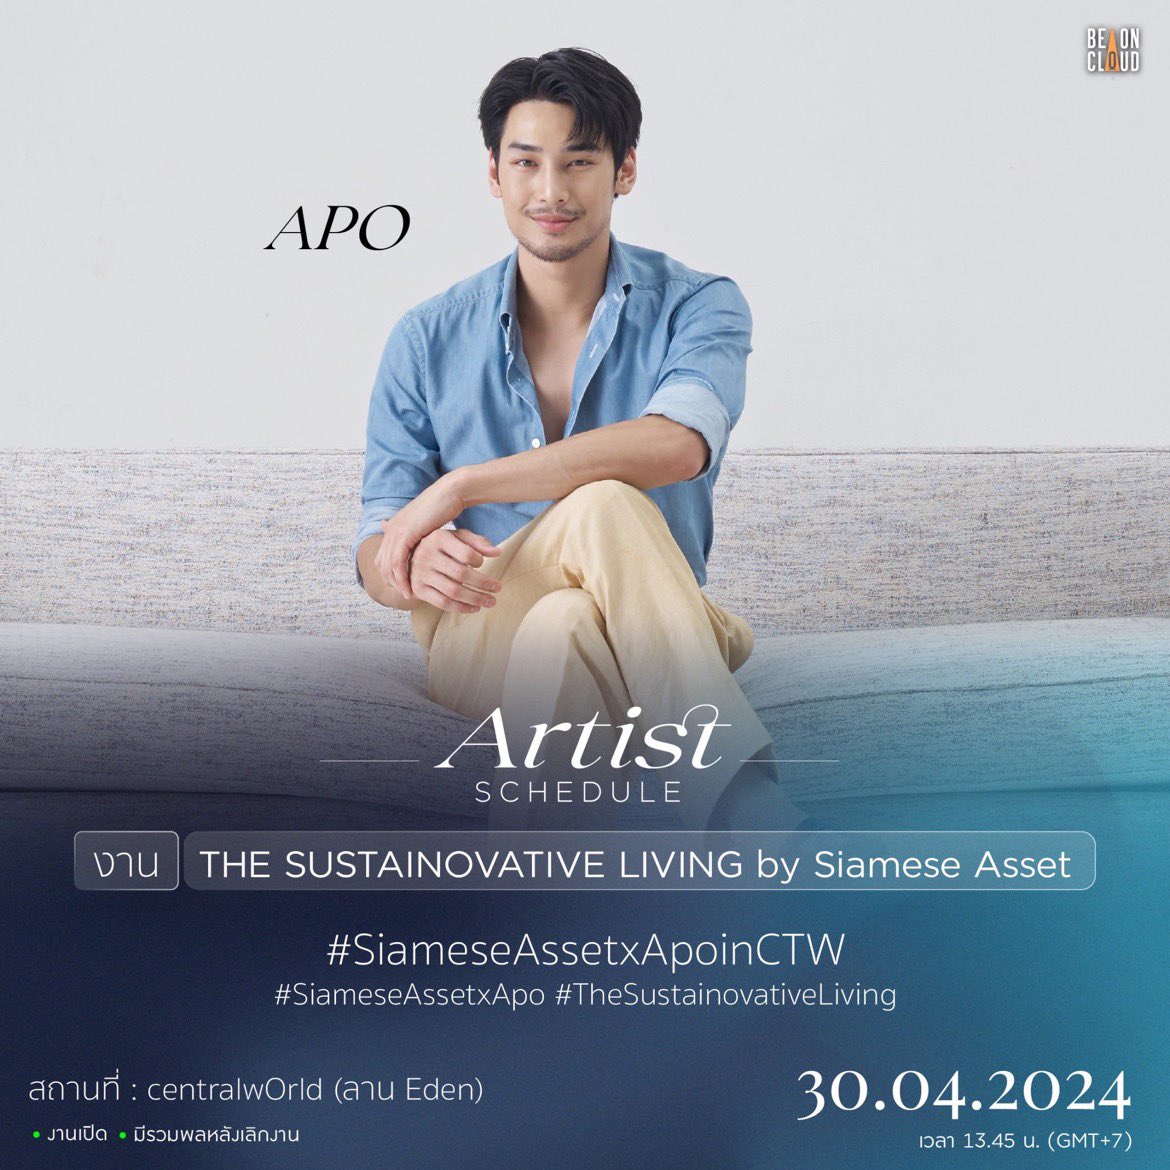 Hello #apocoIIeagues. Be ready for Apo’s event. We have so much content from SiameseAssets to trend with. Let your friends on rest know to come to work

THE SUSTAINOVATIVE LIVING by Siamese Asset 
📌 30.04.2024 
⏳ 13.45 น. | 01.45 PM (GMT+7)
📍ลาน Eden ศูนย์การค้า centralwOrld